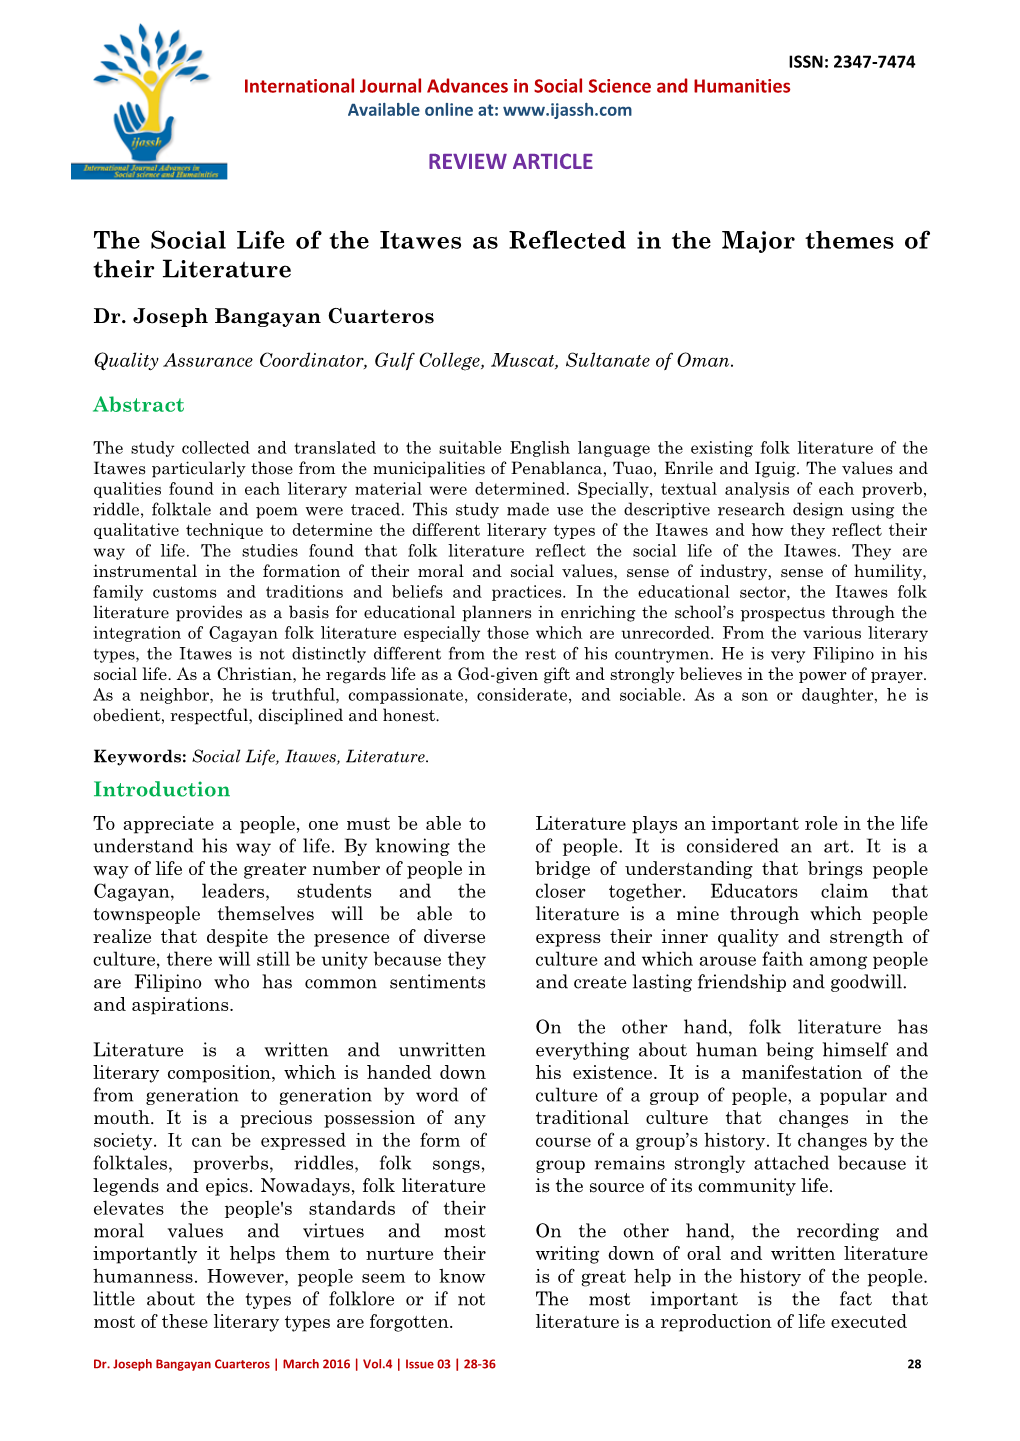 REVIEW ARTICLE the Social Life of the Itawes As Reflected in the Major